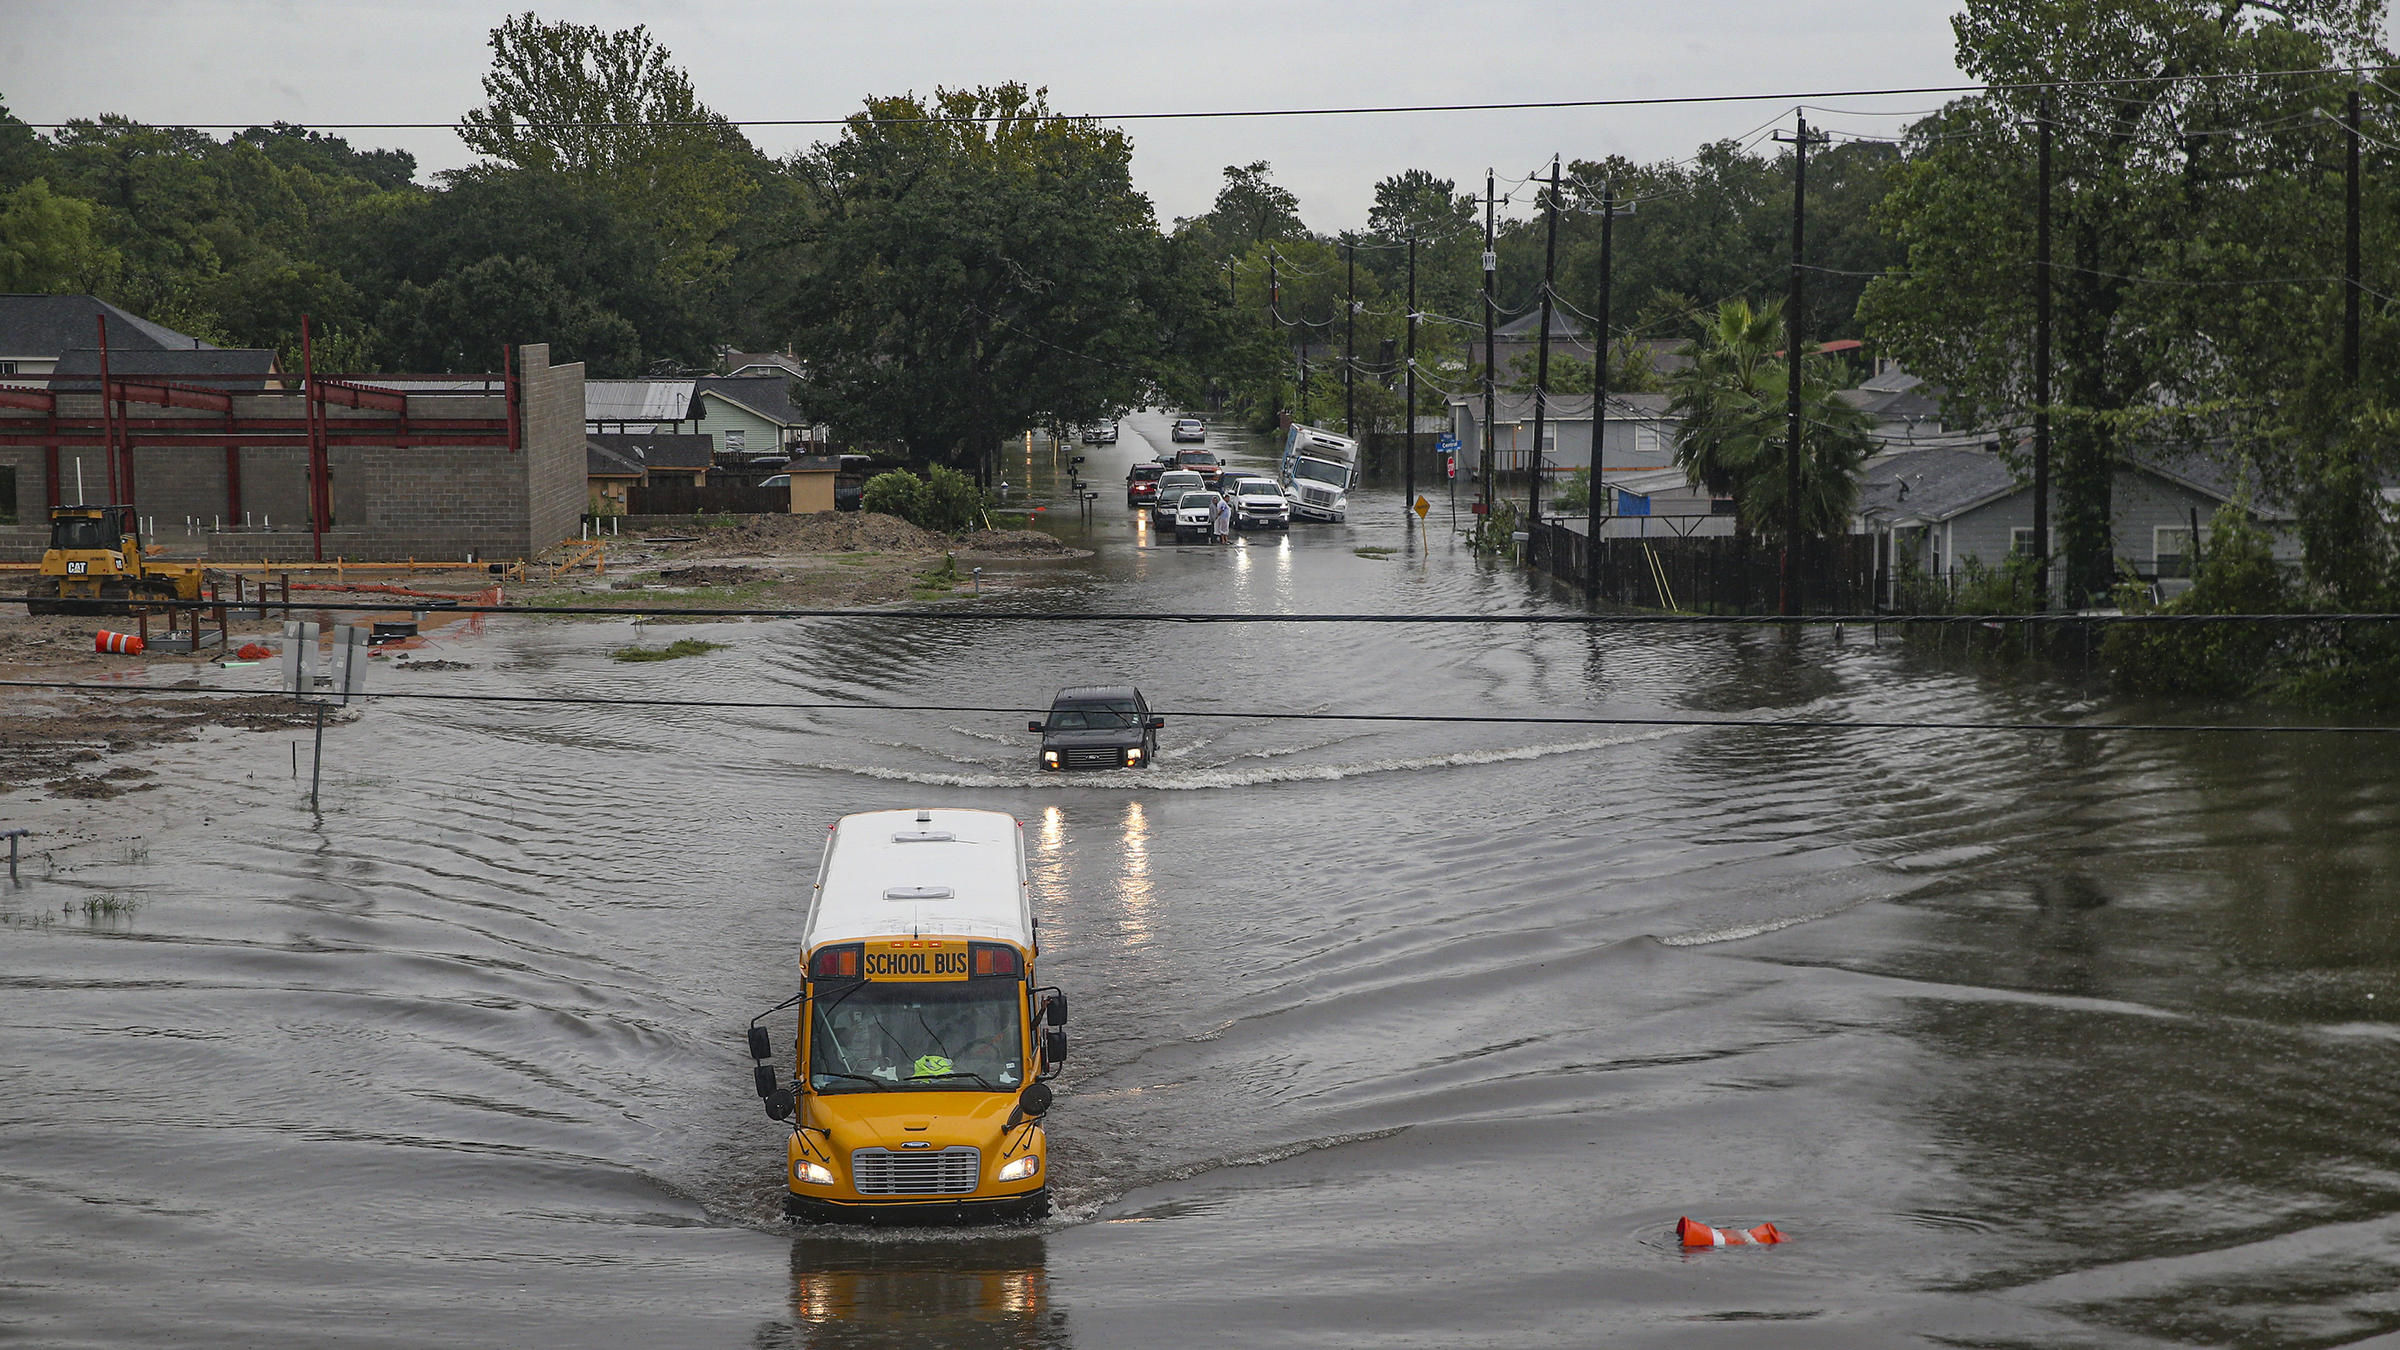 A school bus makes its way through a flooded road in Houston